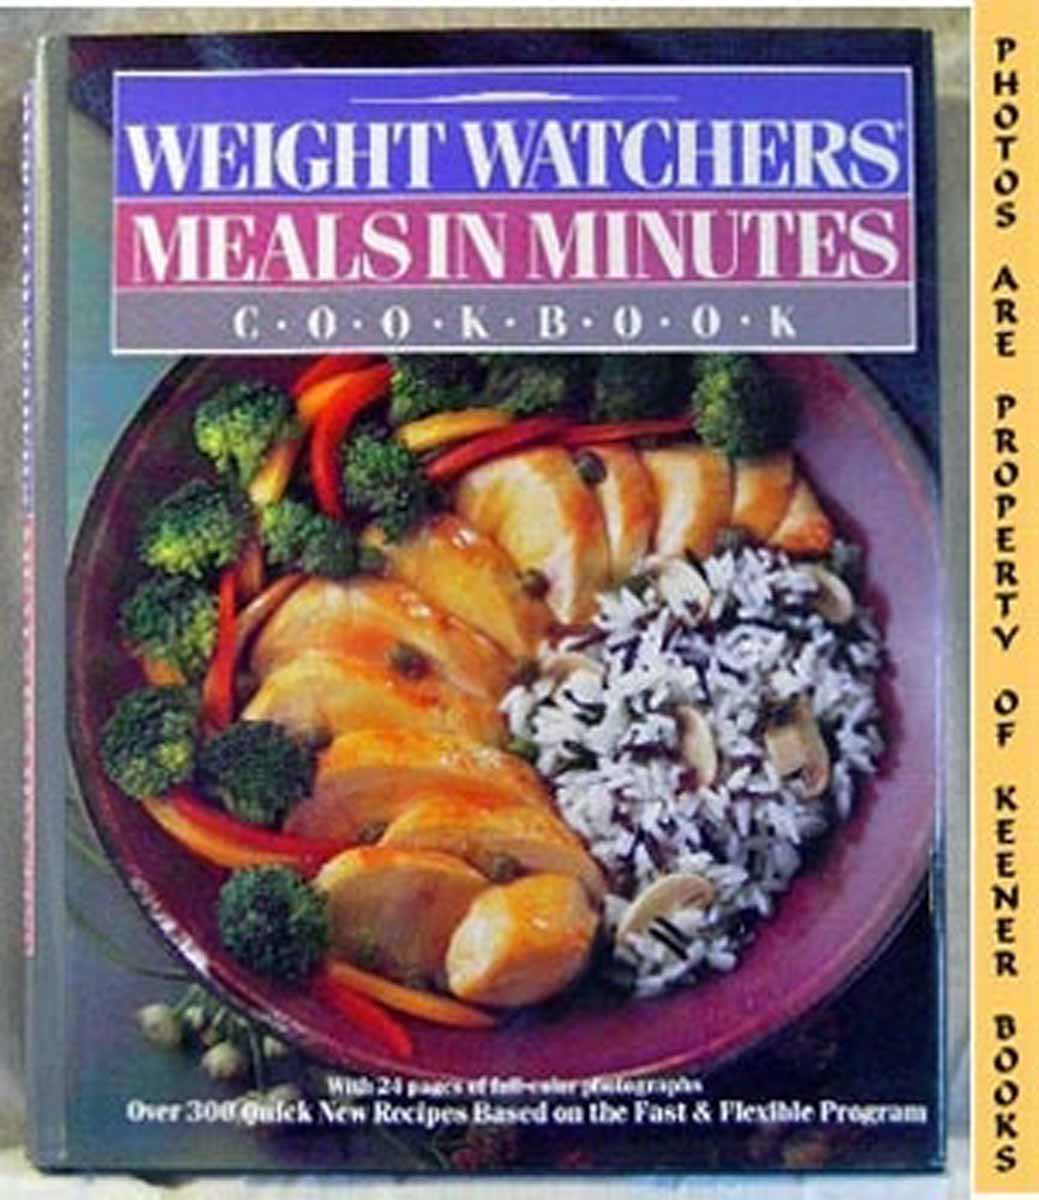 (NO AUTHOR LISTED) - Weight Watchers Meals in Minutes Cookbook : Over 300 Quick Recipes Based on the Fast & Flexible Program